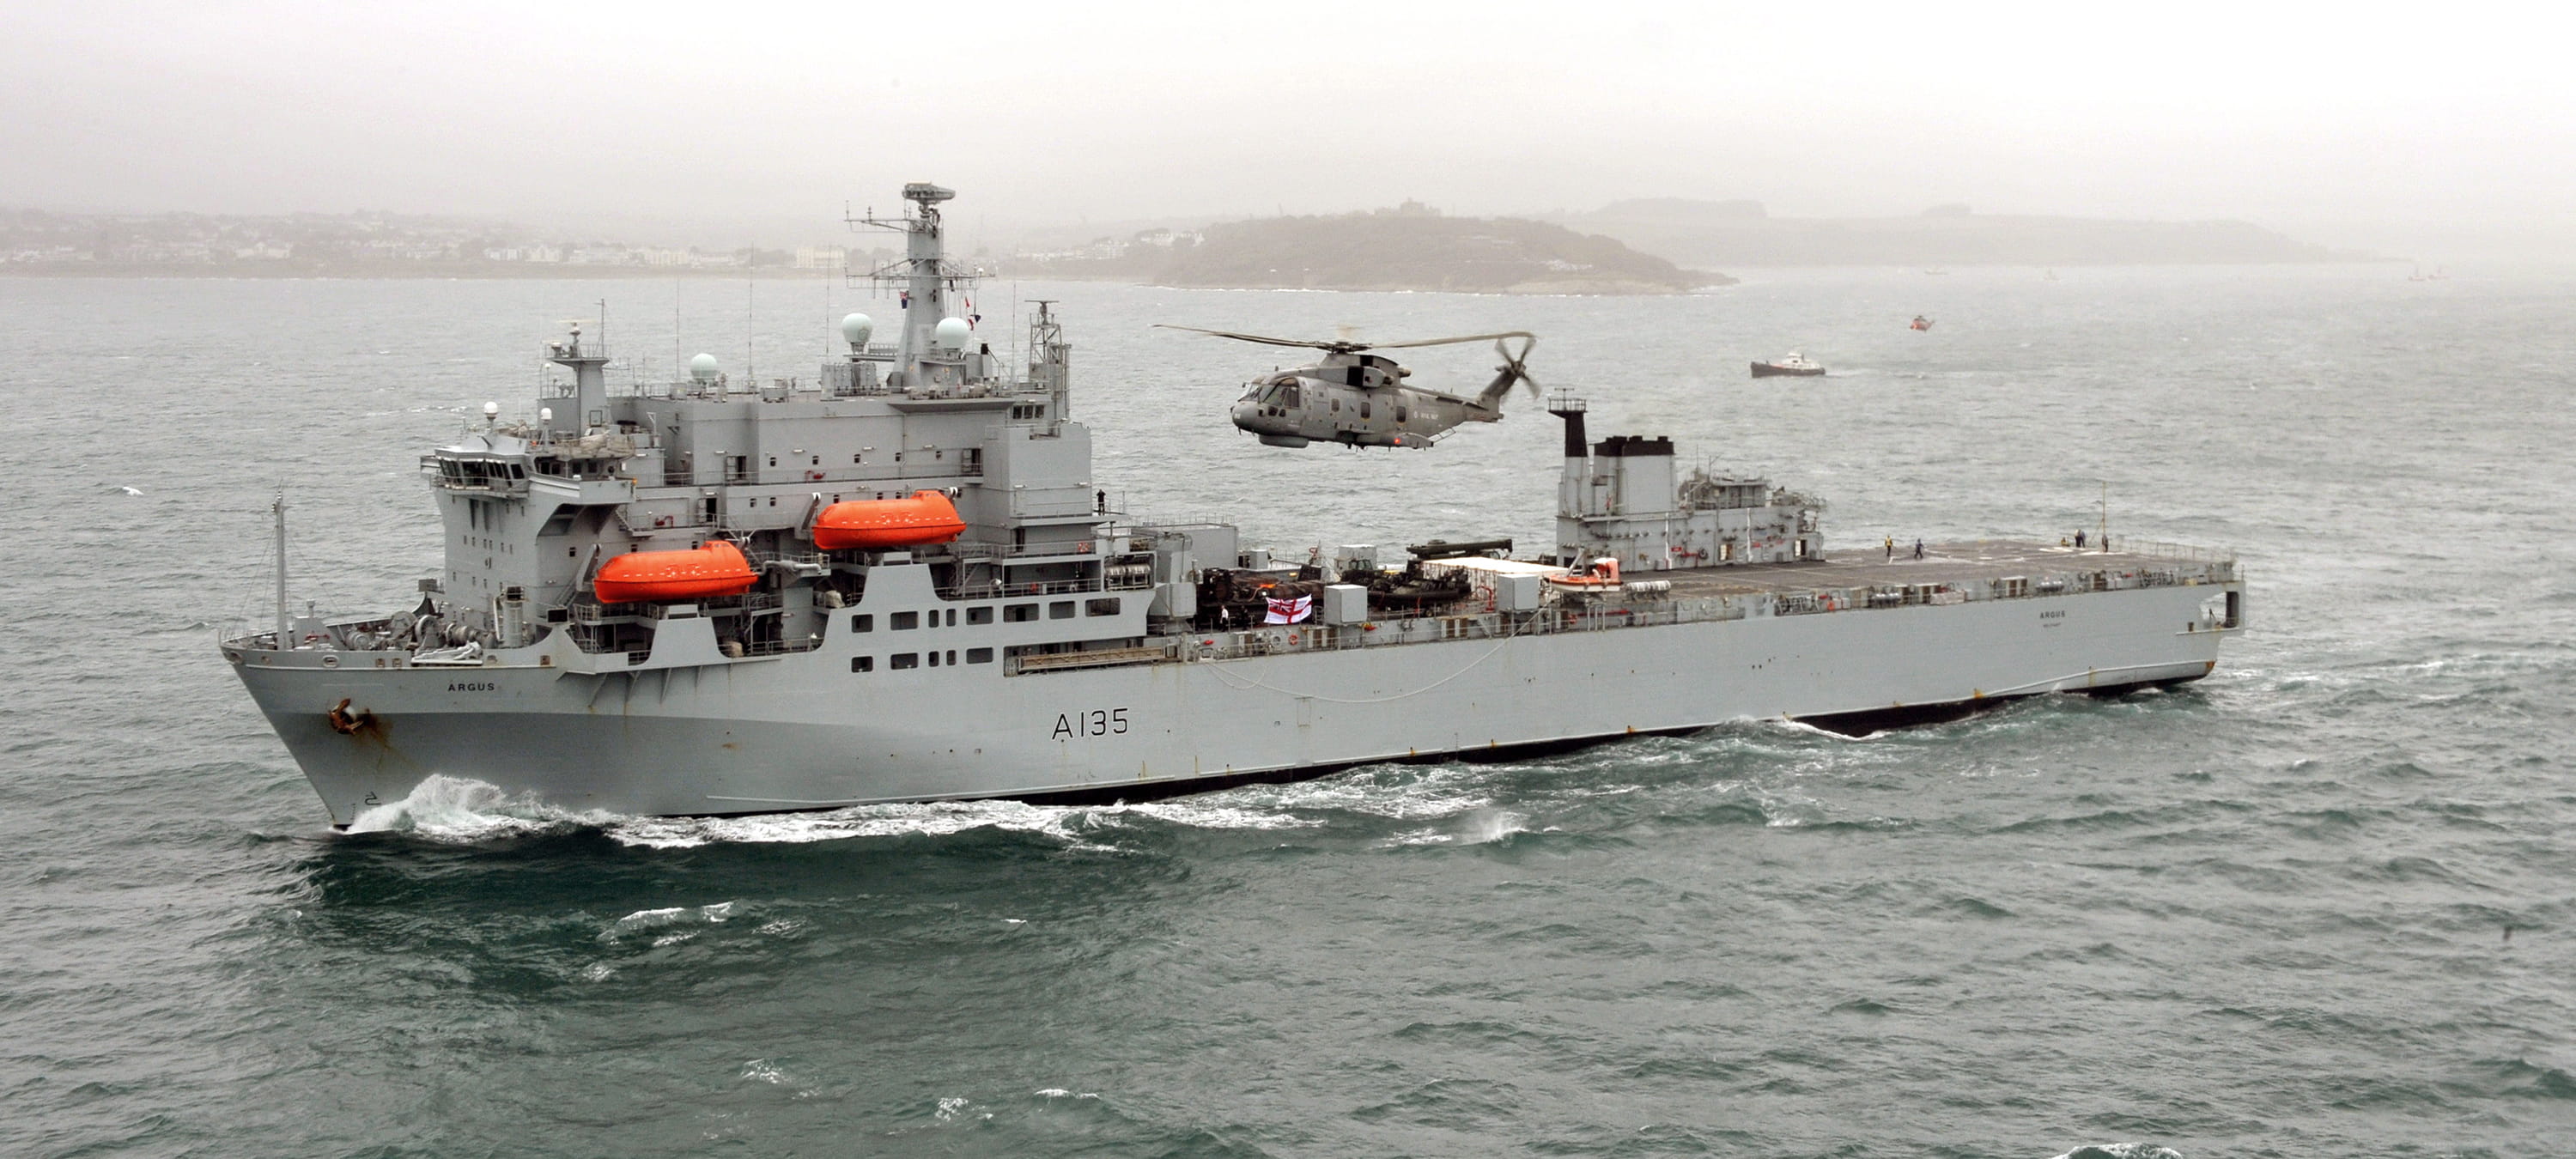 Merlin helicopter comes in for landing on RFA Argus